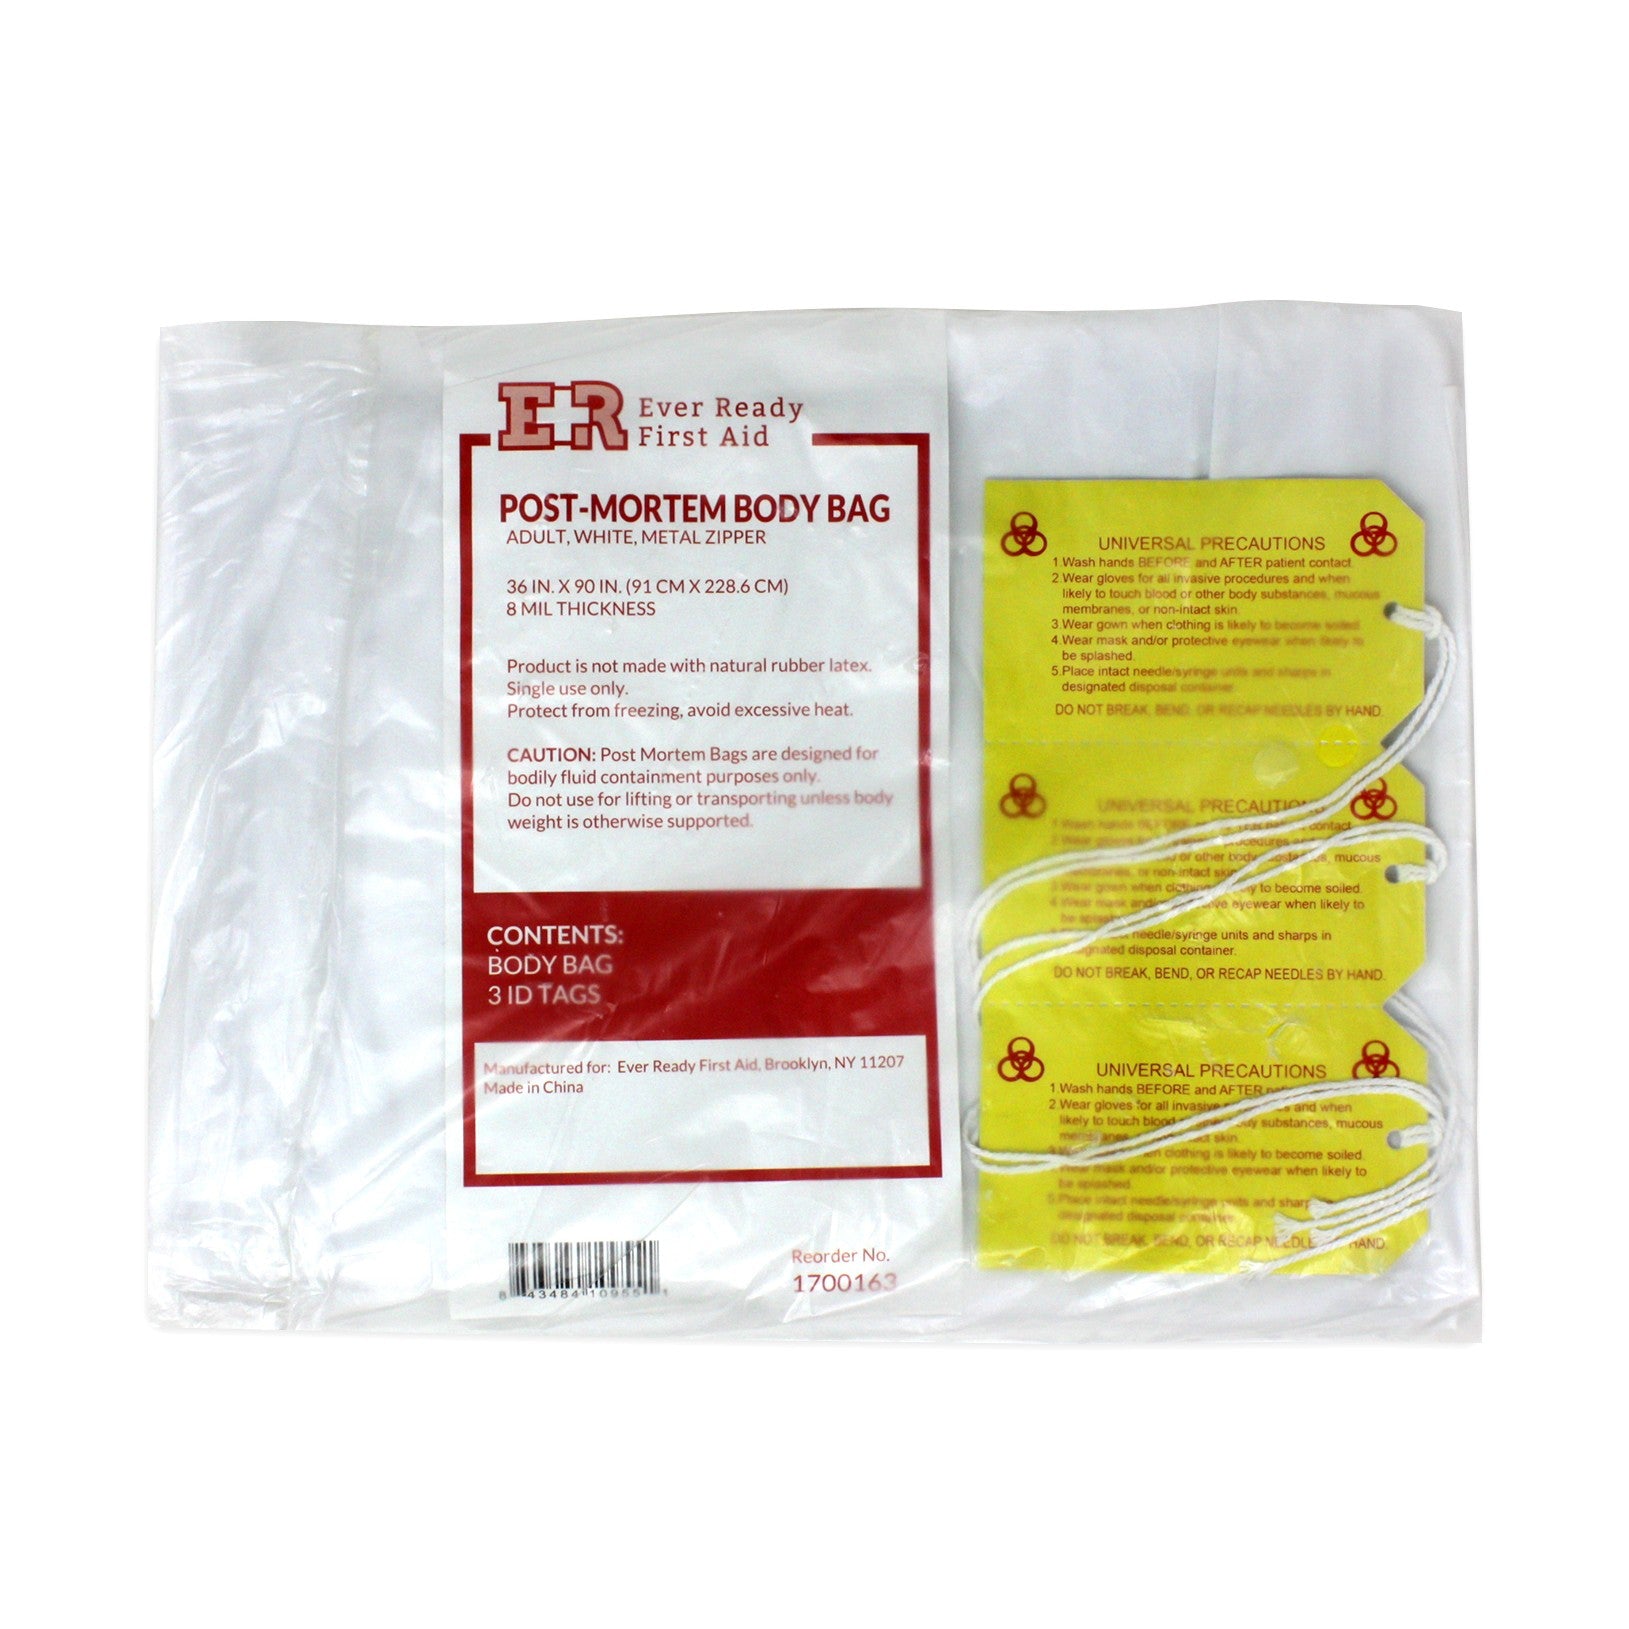 Ever Ready First Aid PVC Body Bag with Metal Zipper for Adult, White, 36" x 90" with ID Tags